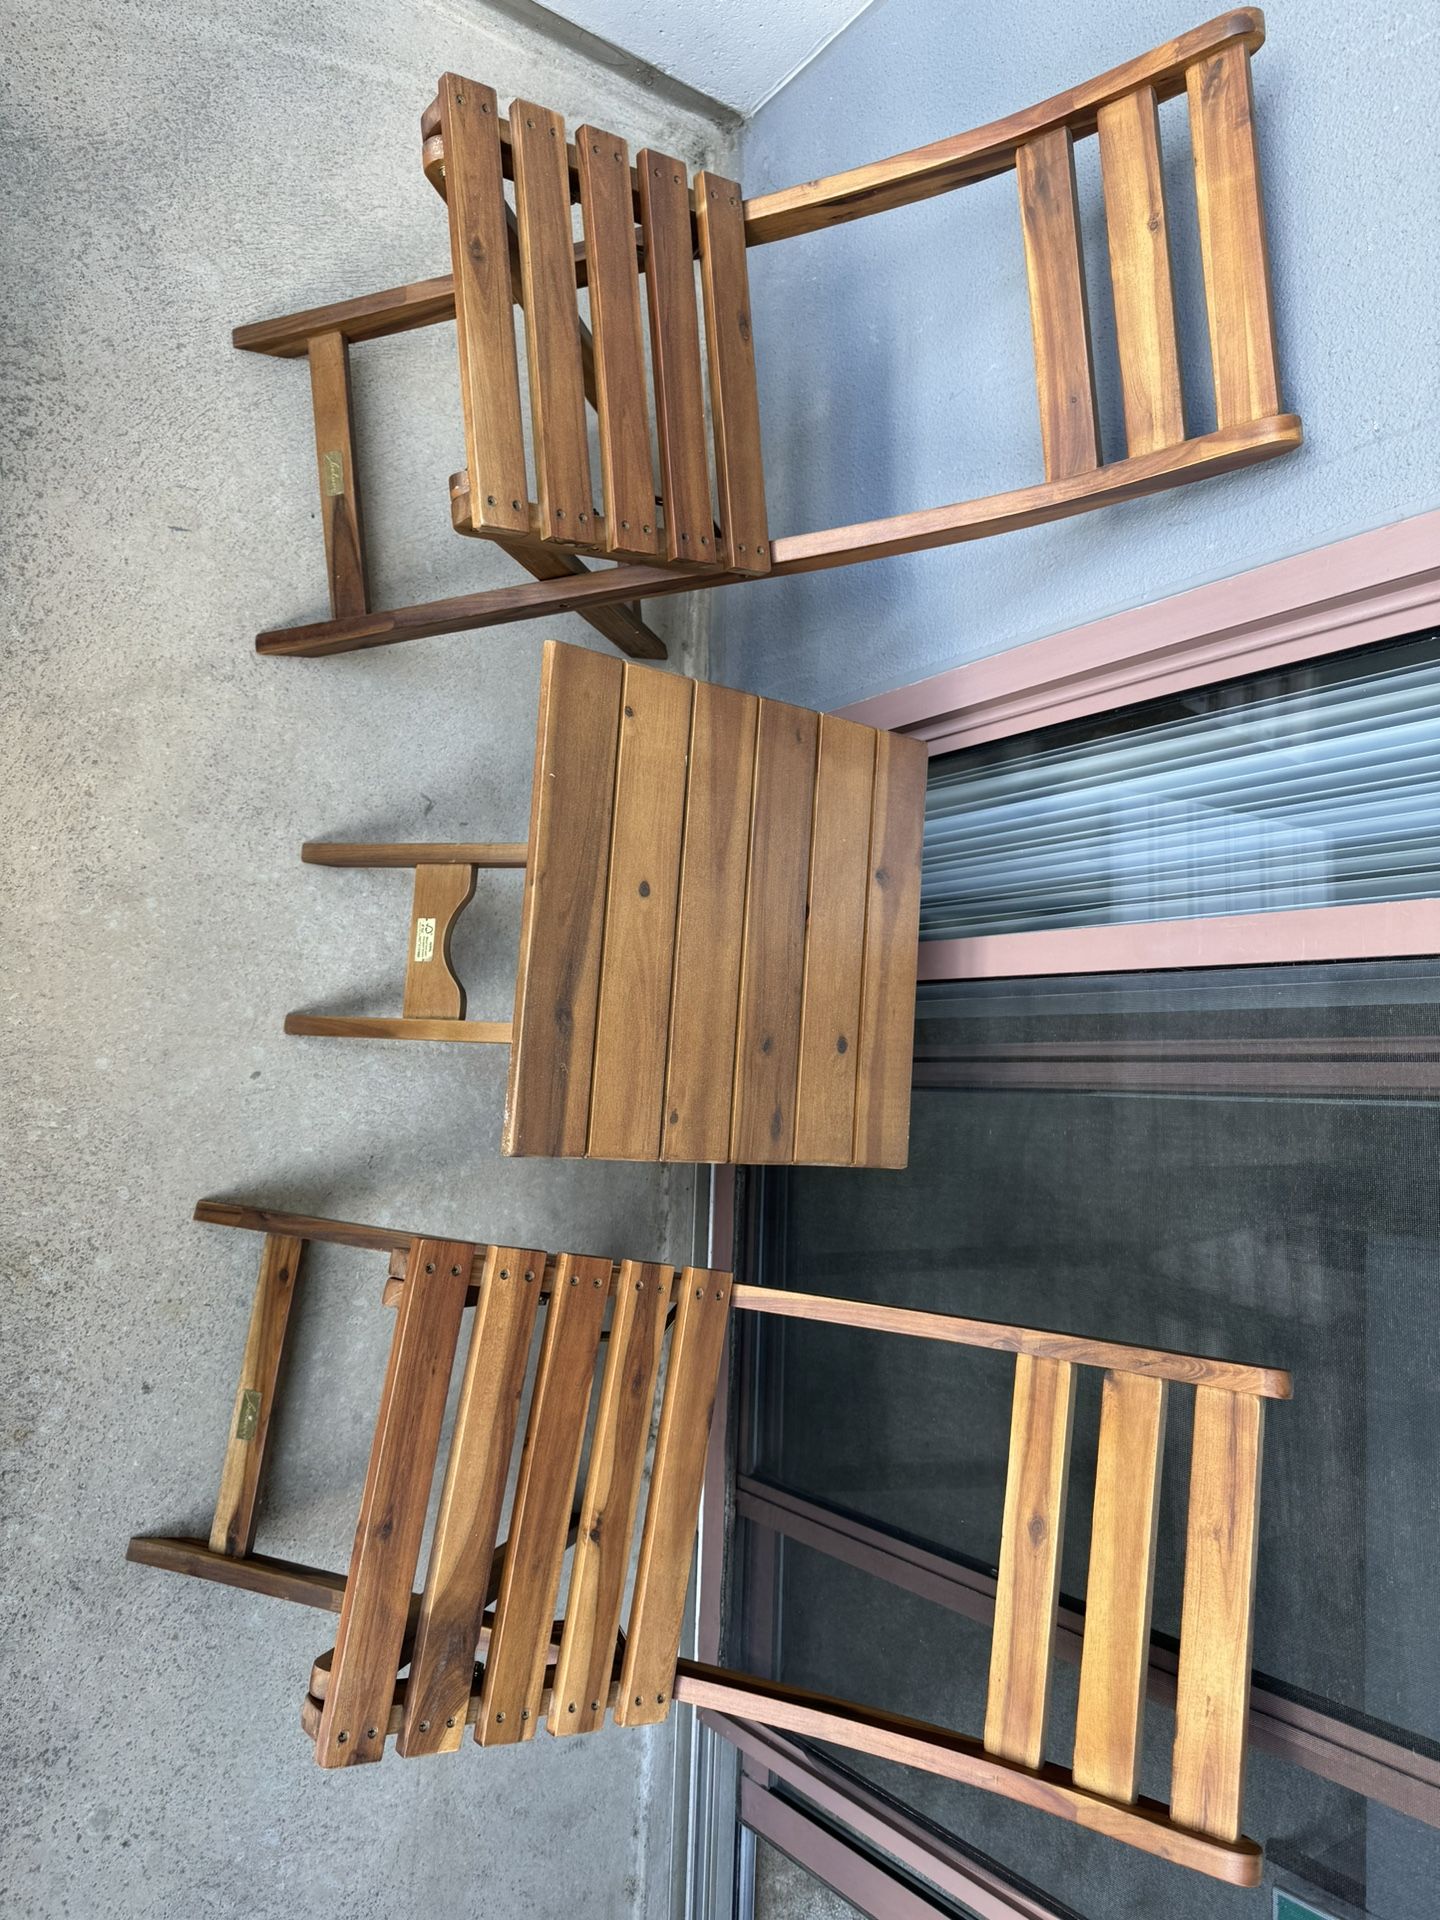 Balcony Wooden Chairs With Table